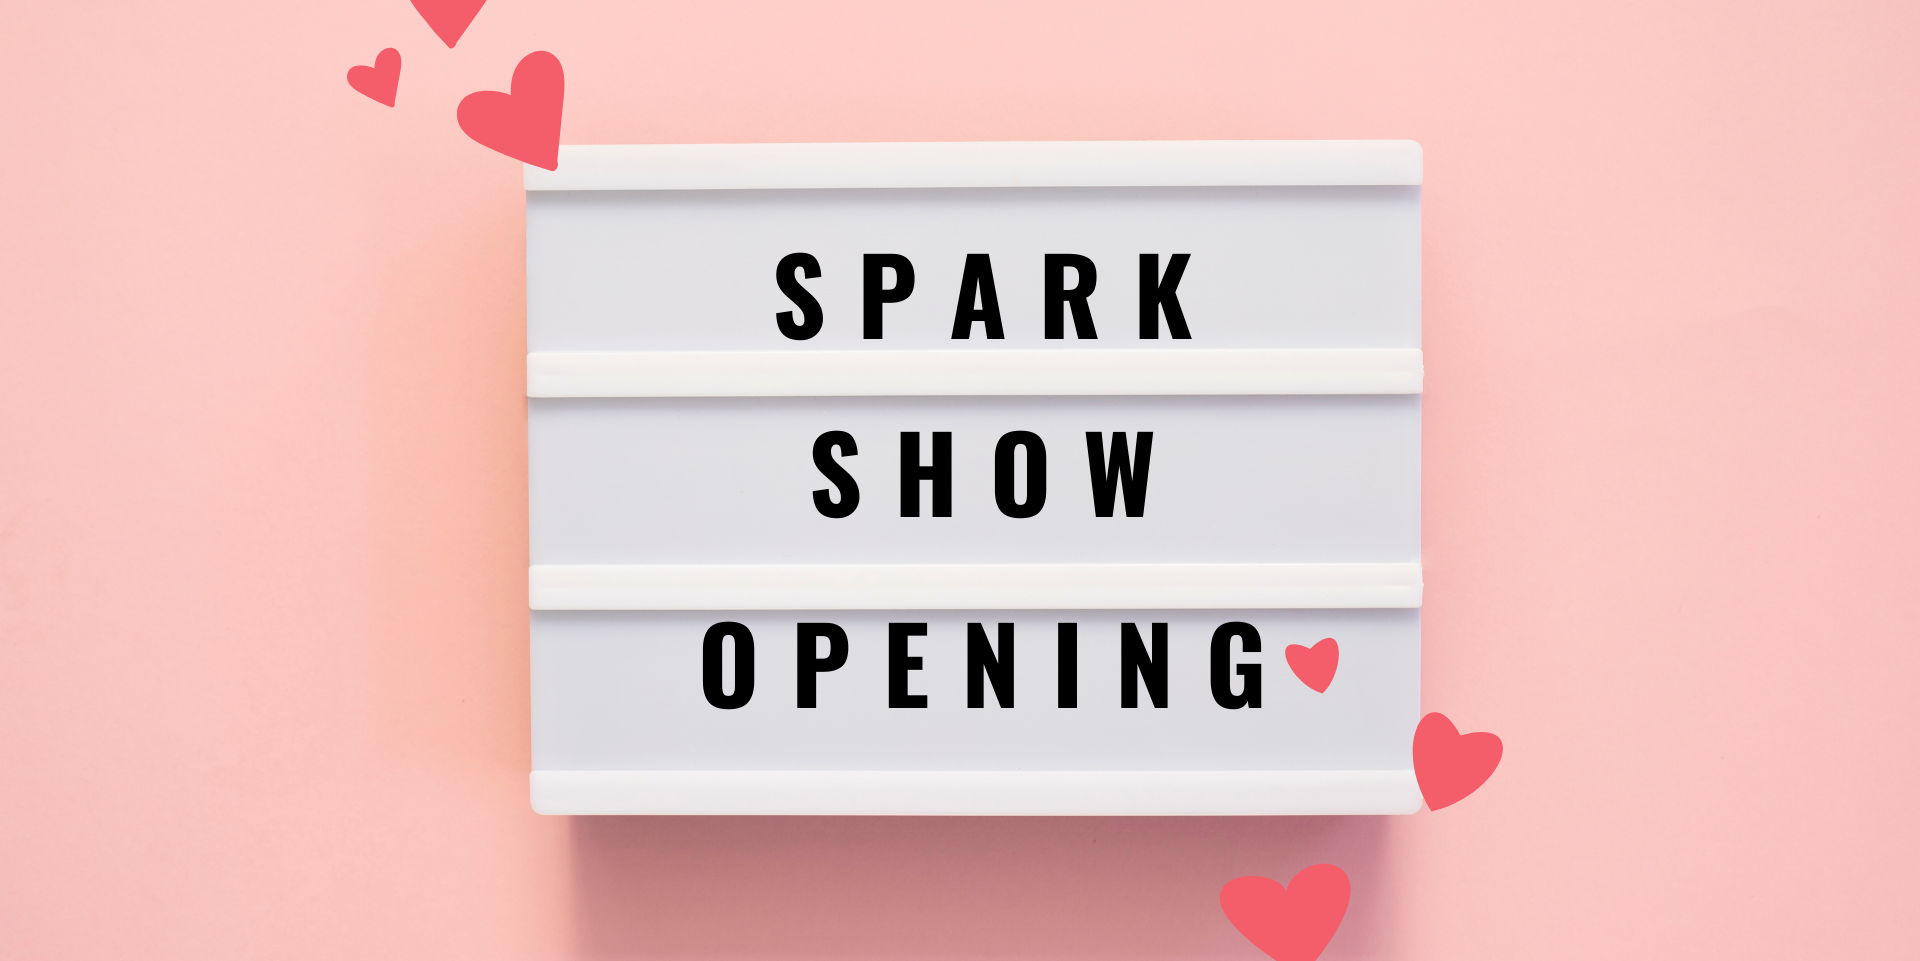 SPARK Exhibition Opening promotional image